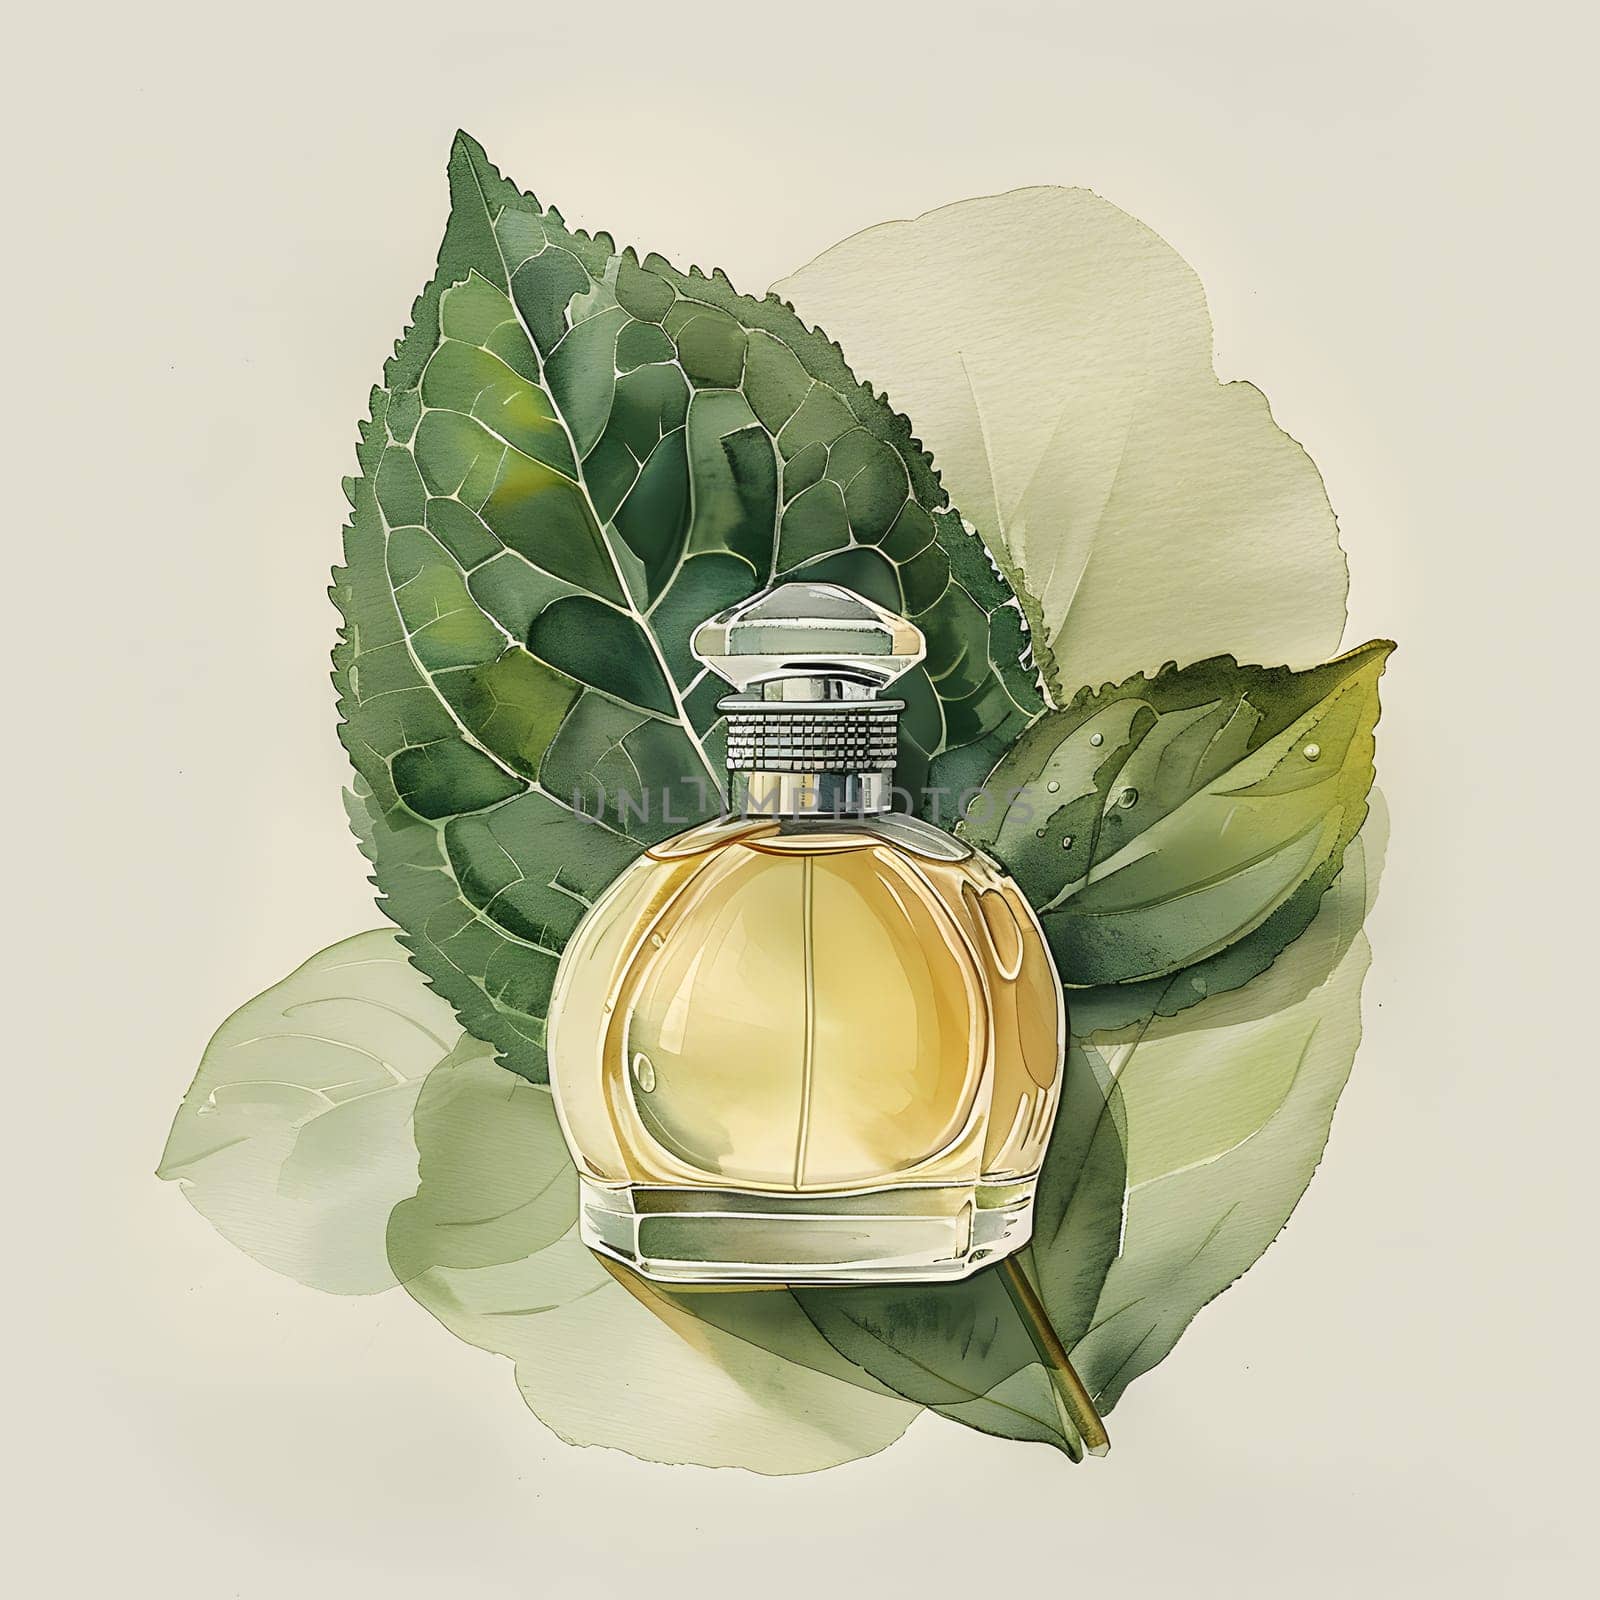 A bottle of perfume, a fashion accessory, sits amidst a bed of green leaves. Its liquid contents glisten through the glass, a creative arts display of nature and elegance